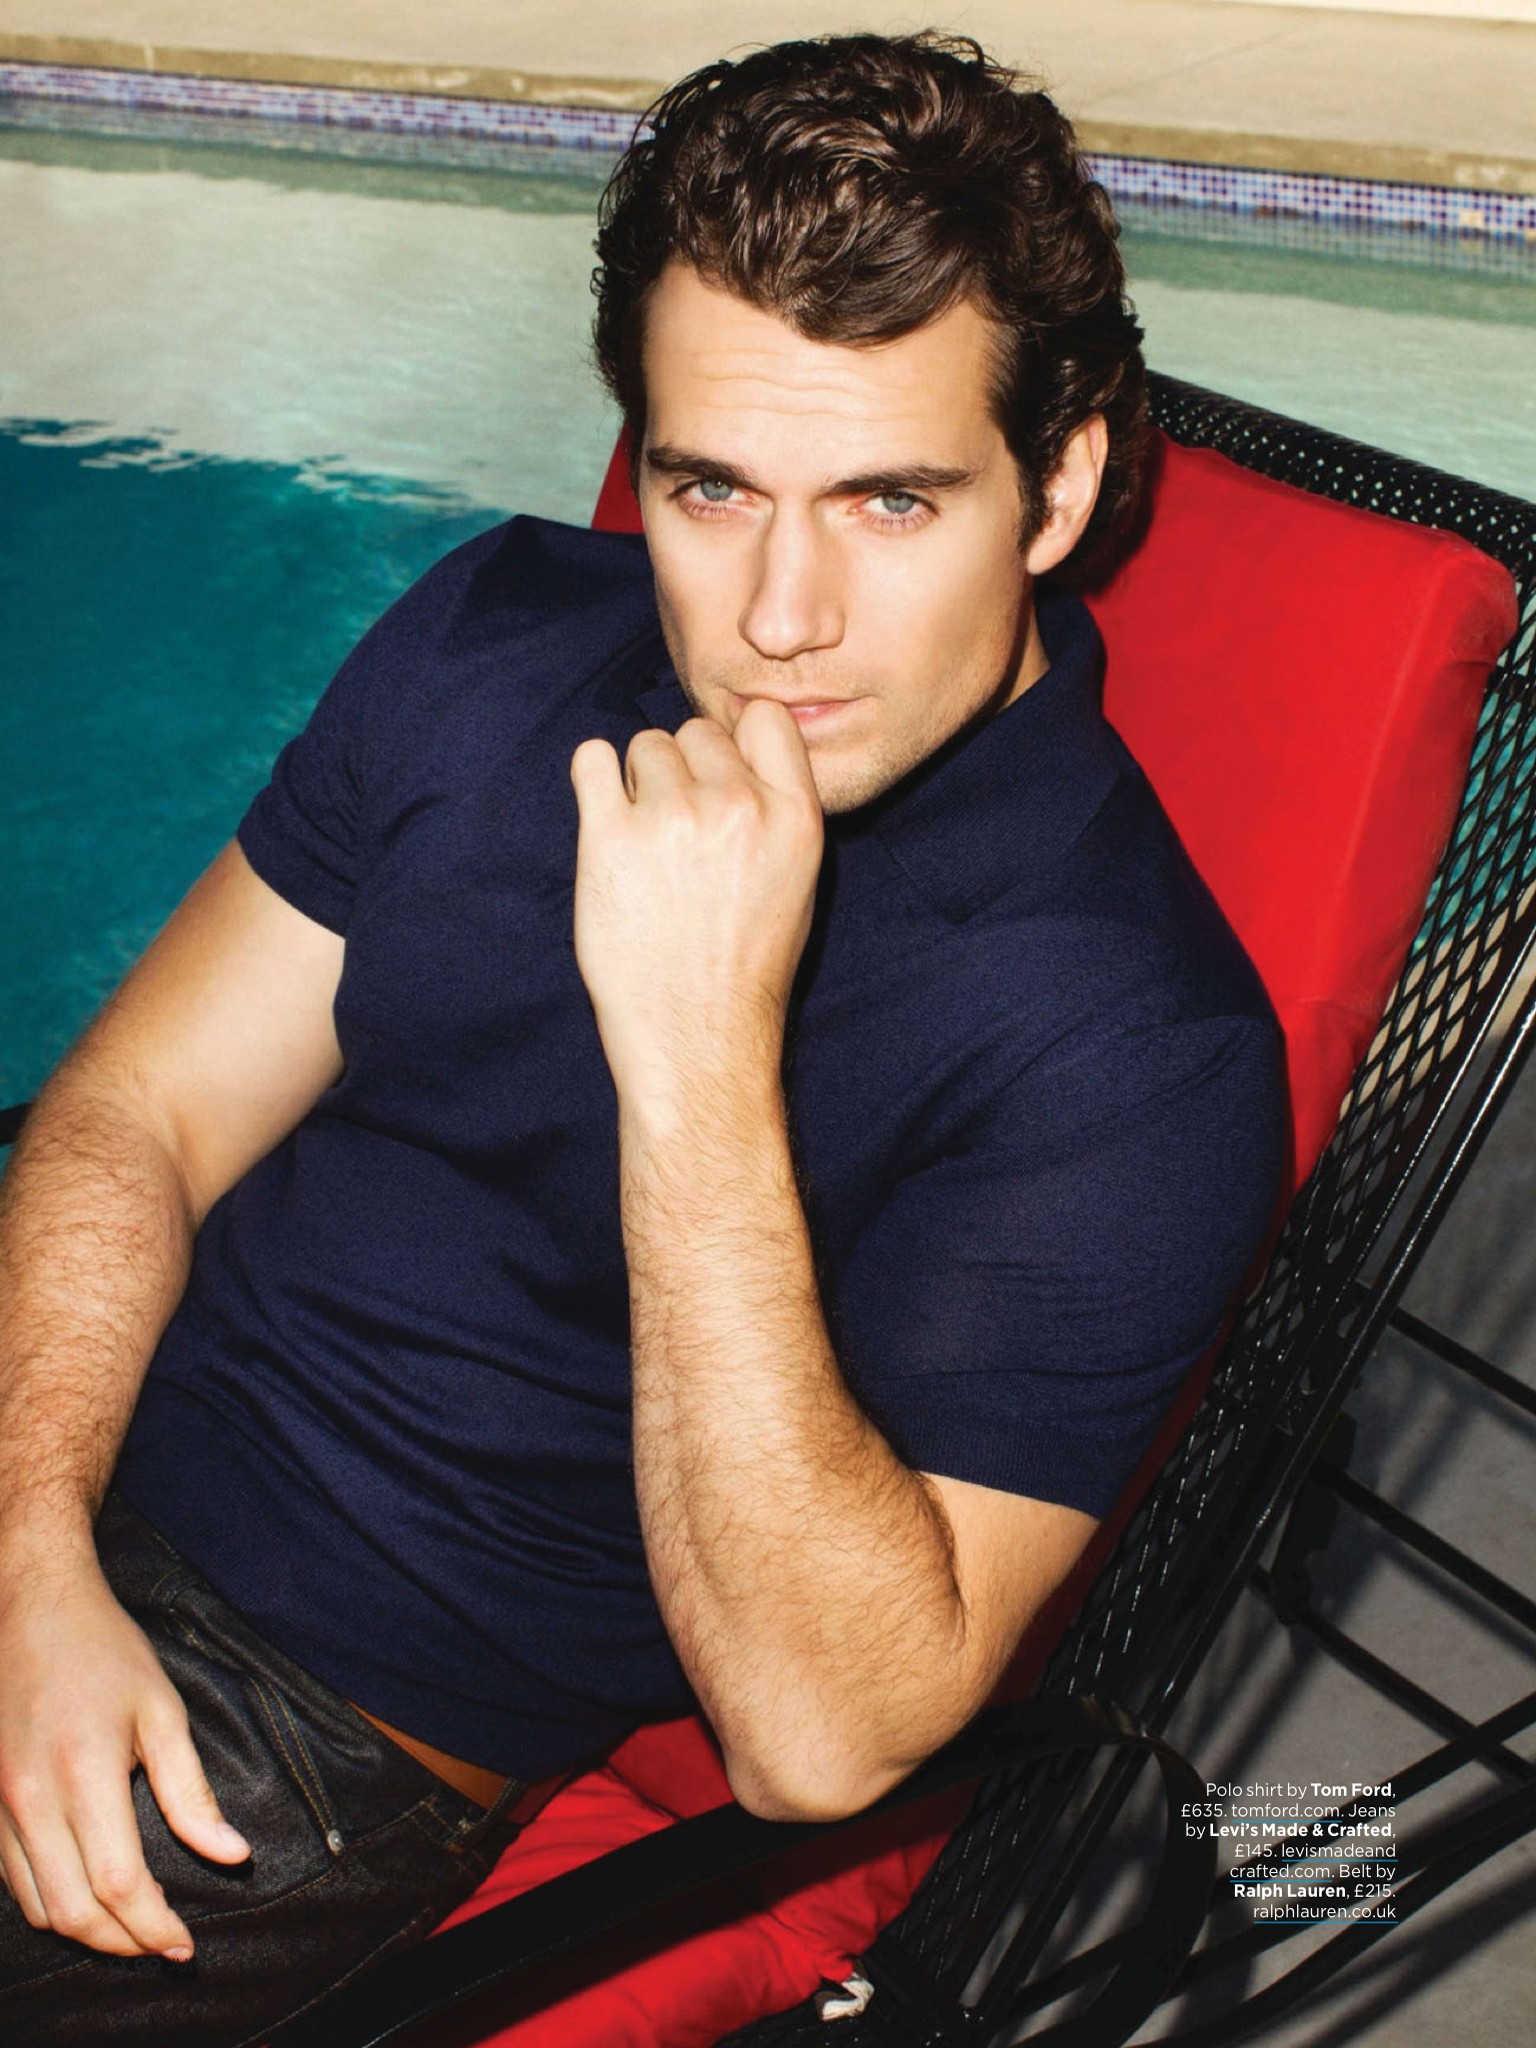 Henry Cavill On The Cover Of British Gq Magazines June 2013 Edition 